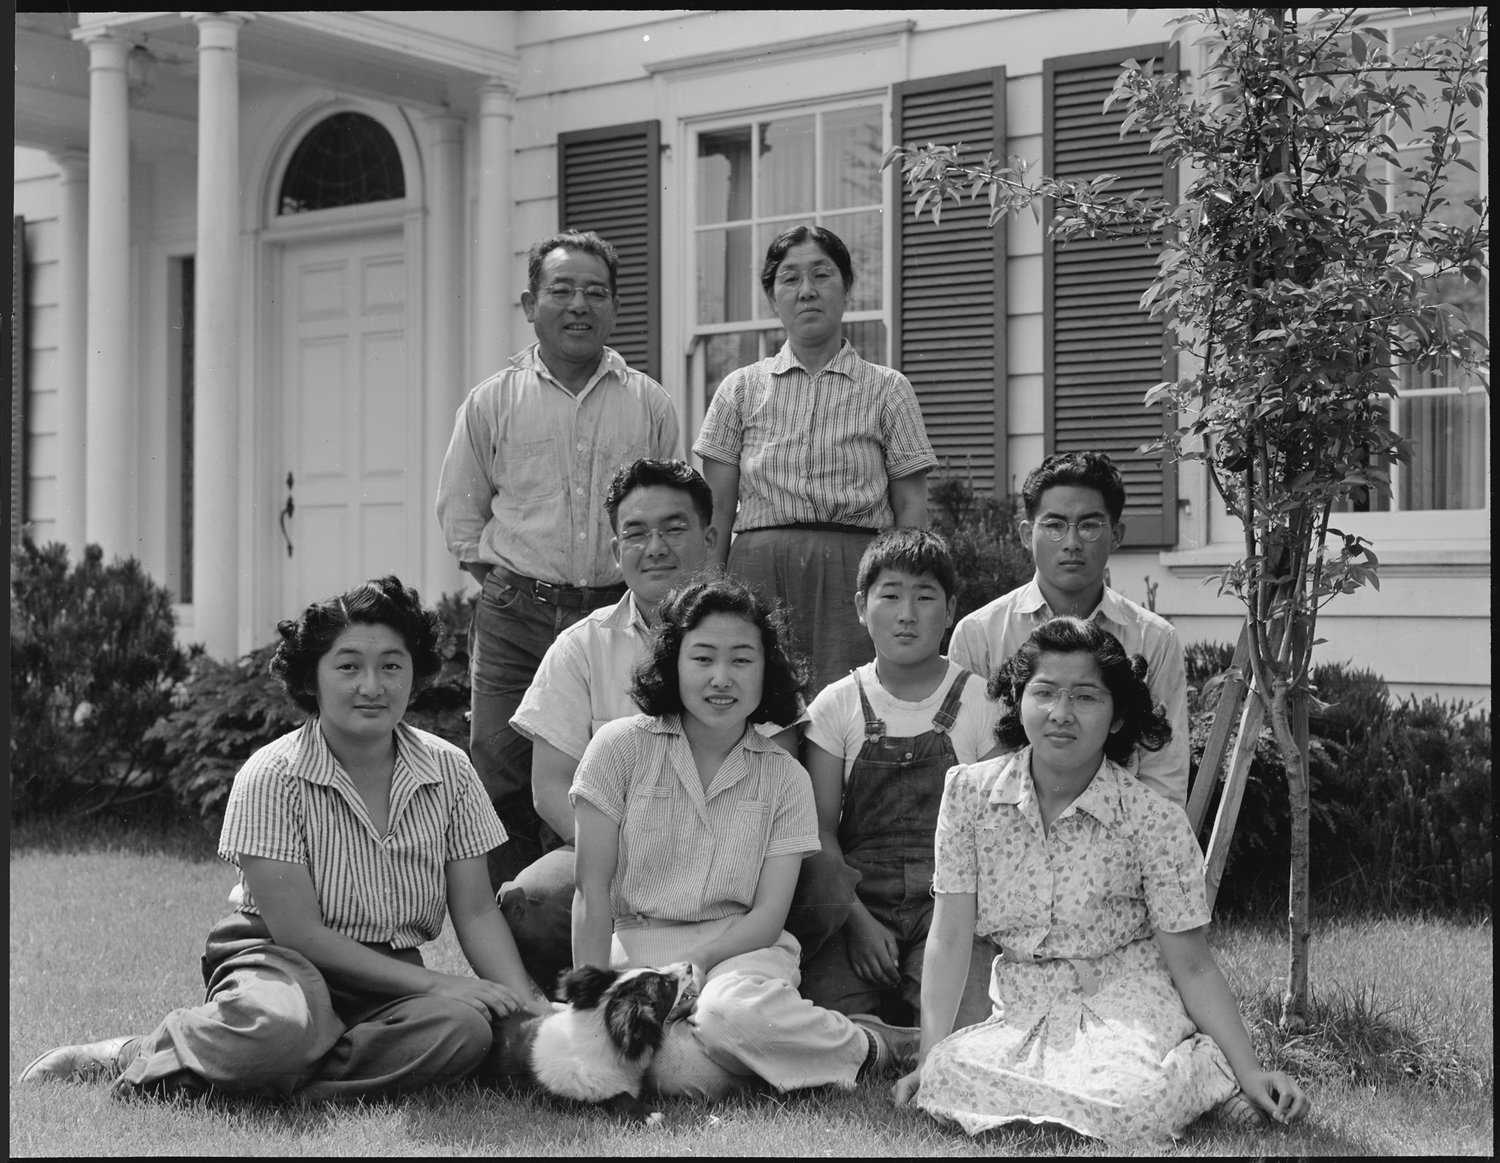  Mountain View, California. Members of the Shibuya family are pictured at their home before evacuation. The father and the mother were born in Japan and came to this country in 1904. At that time the father had 0 in cash and a basket of clothes. He later built a prosperous business of raising select varieties of chrysanthemums which he shipped to eastern markets under his own trade name. Six children in the family were born in the United States. The four older children attended leading California Universities. Evacuees of Japanese ancestry will be housed in War Relocation Authority Centers for the duration. 